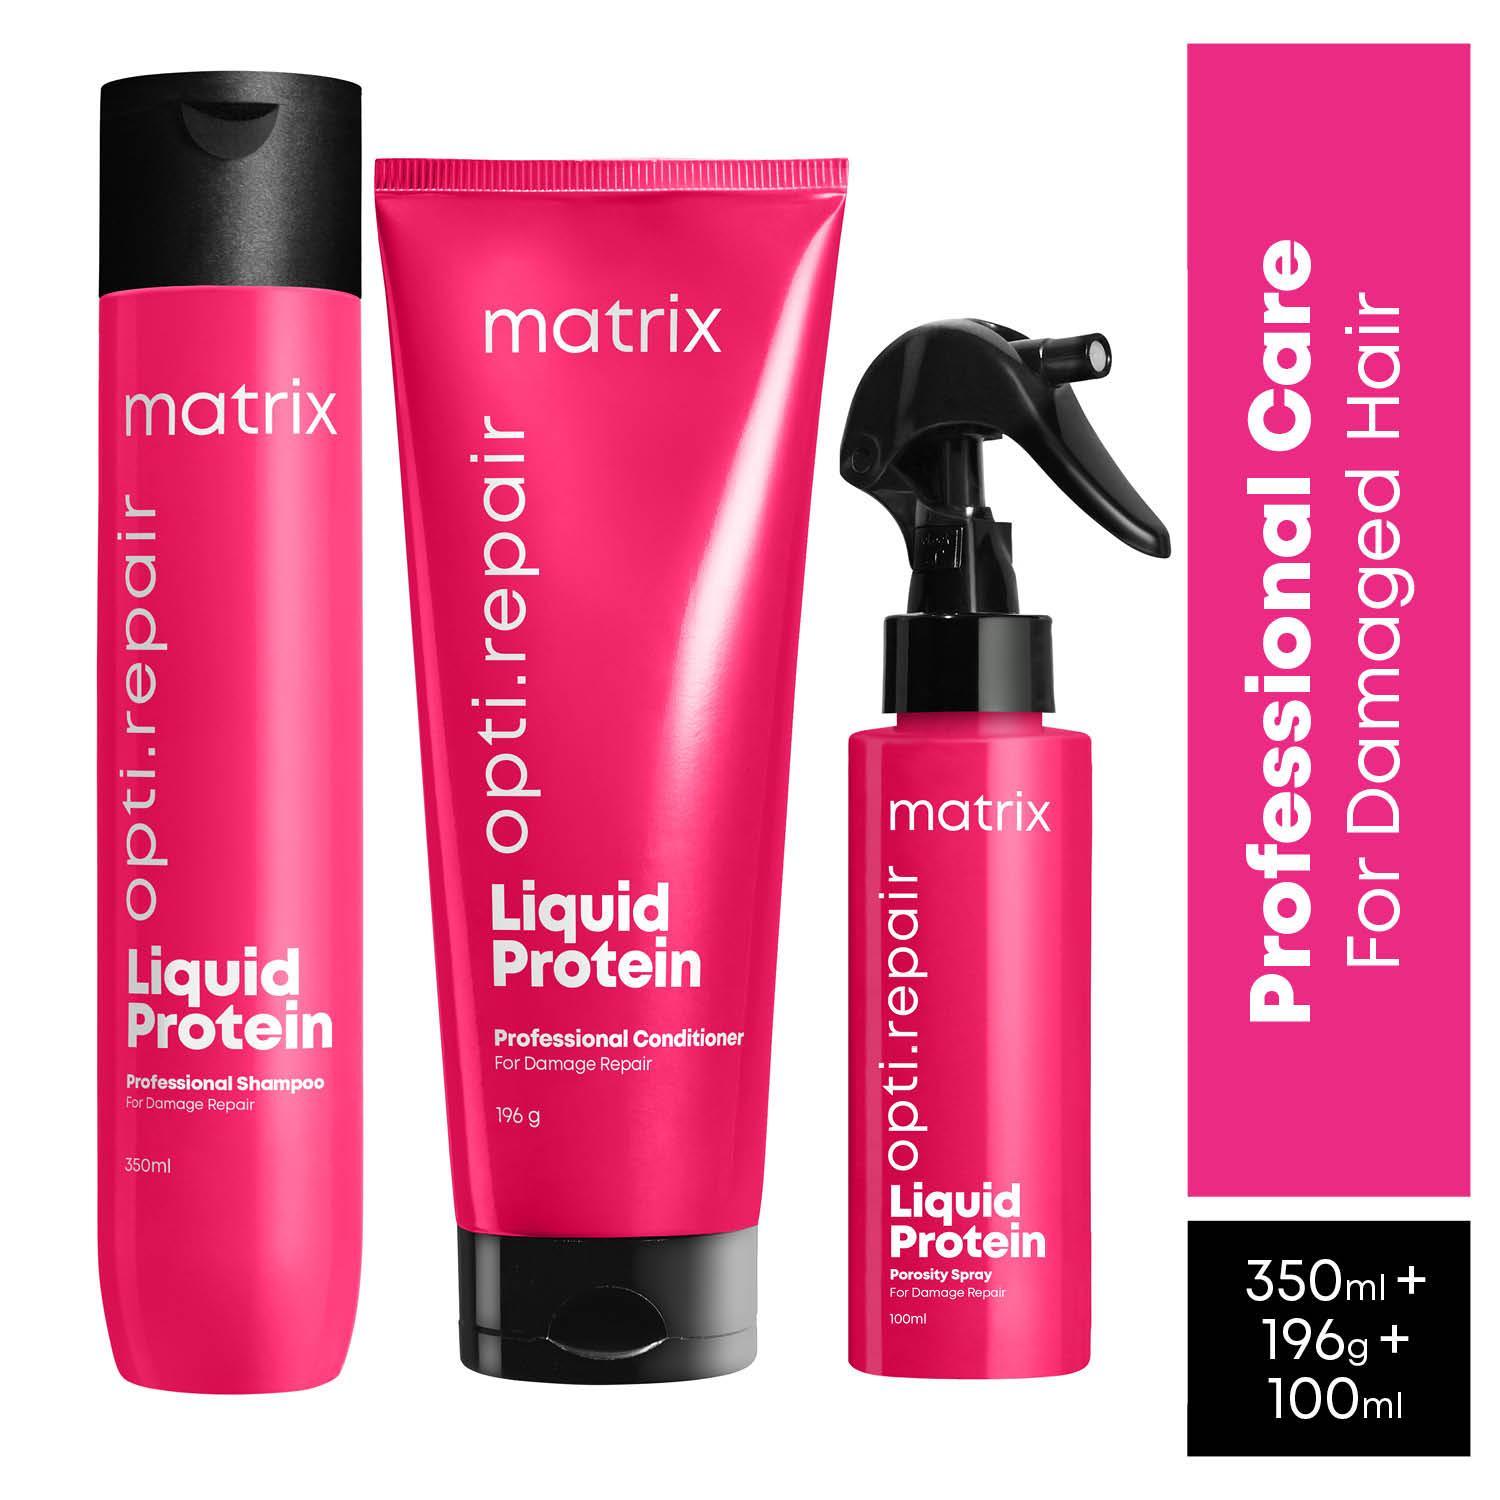 matrix opti.repair professional haircare with proteins for damaged hair (350 ml+196 g+100 ml) combo